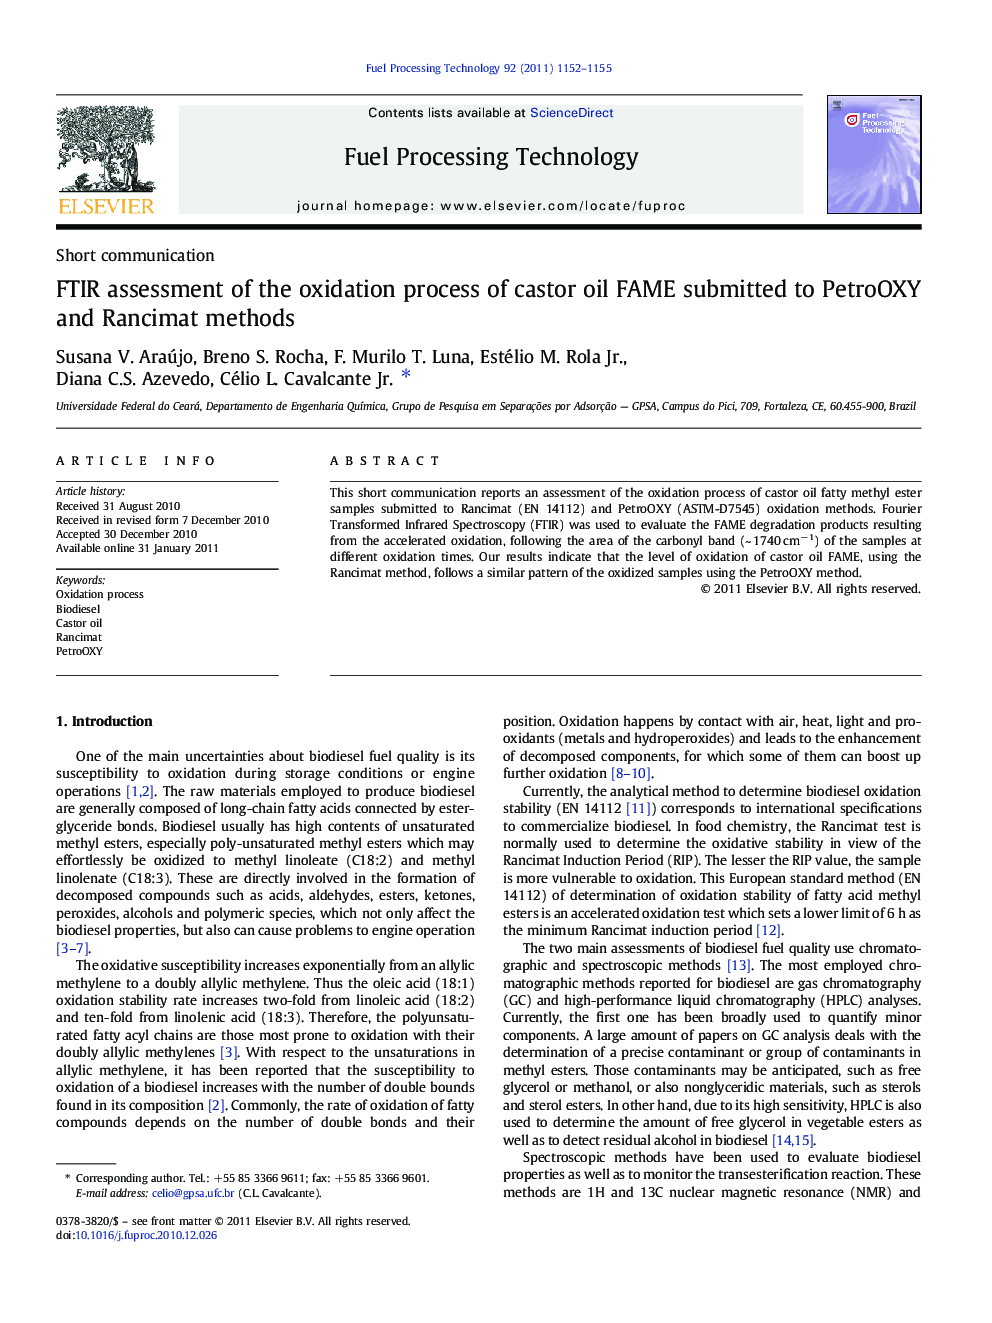 FTIR assessment of the oxidation process of castor oil FAME submitted to PetroOXY and Rancimat methods